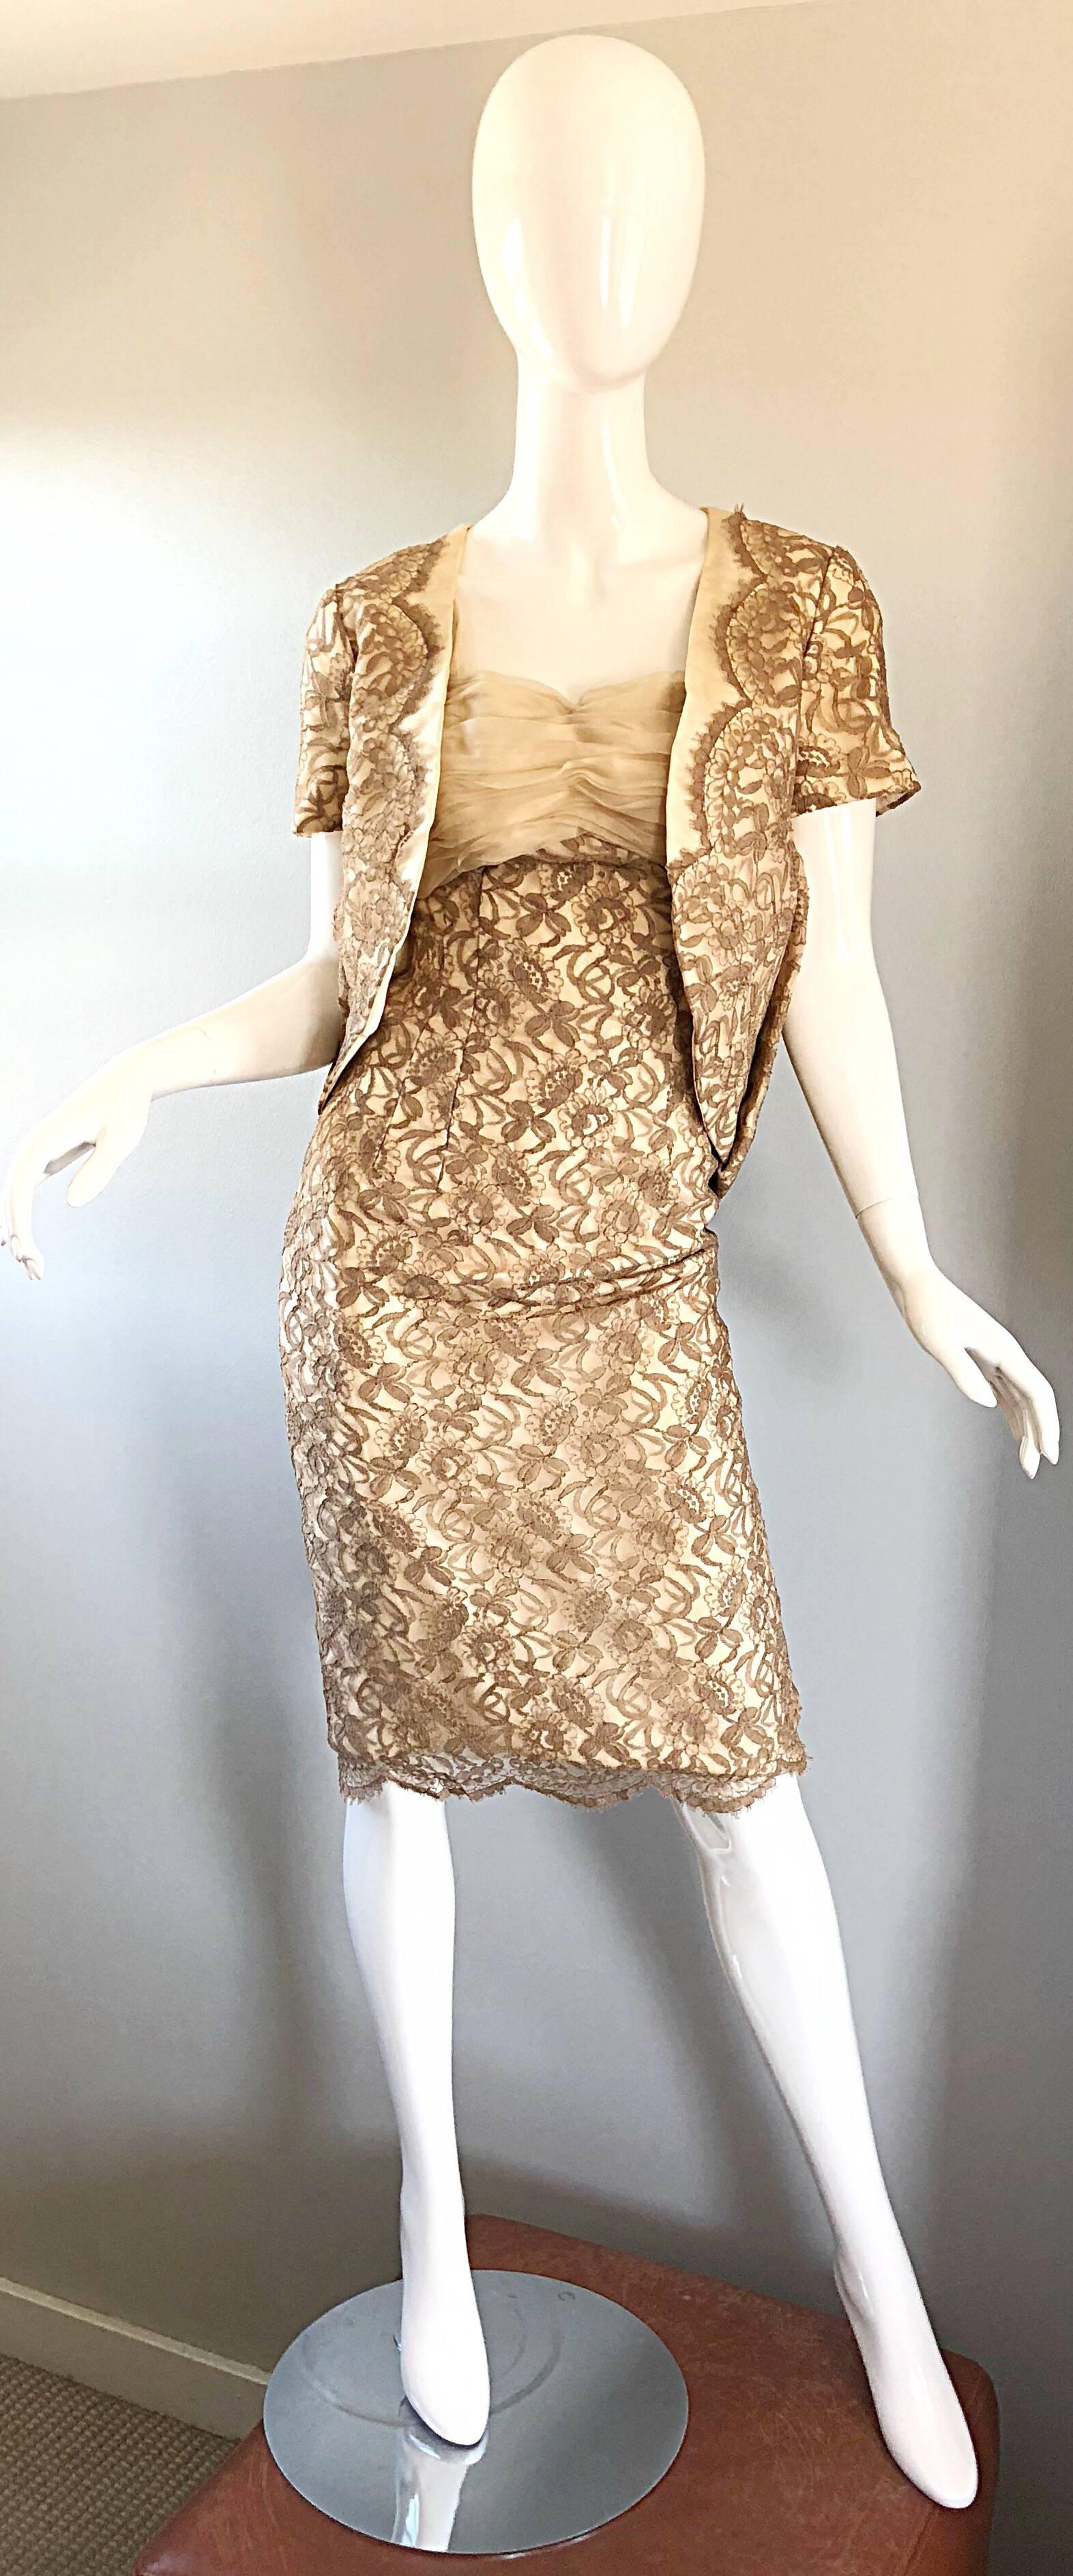 Sensational 1950s Demi Couture Nude Taupe Tan French Lace 50s Dress + Bolero For Sale 2